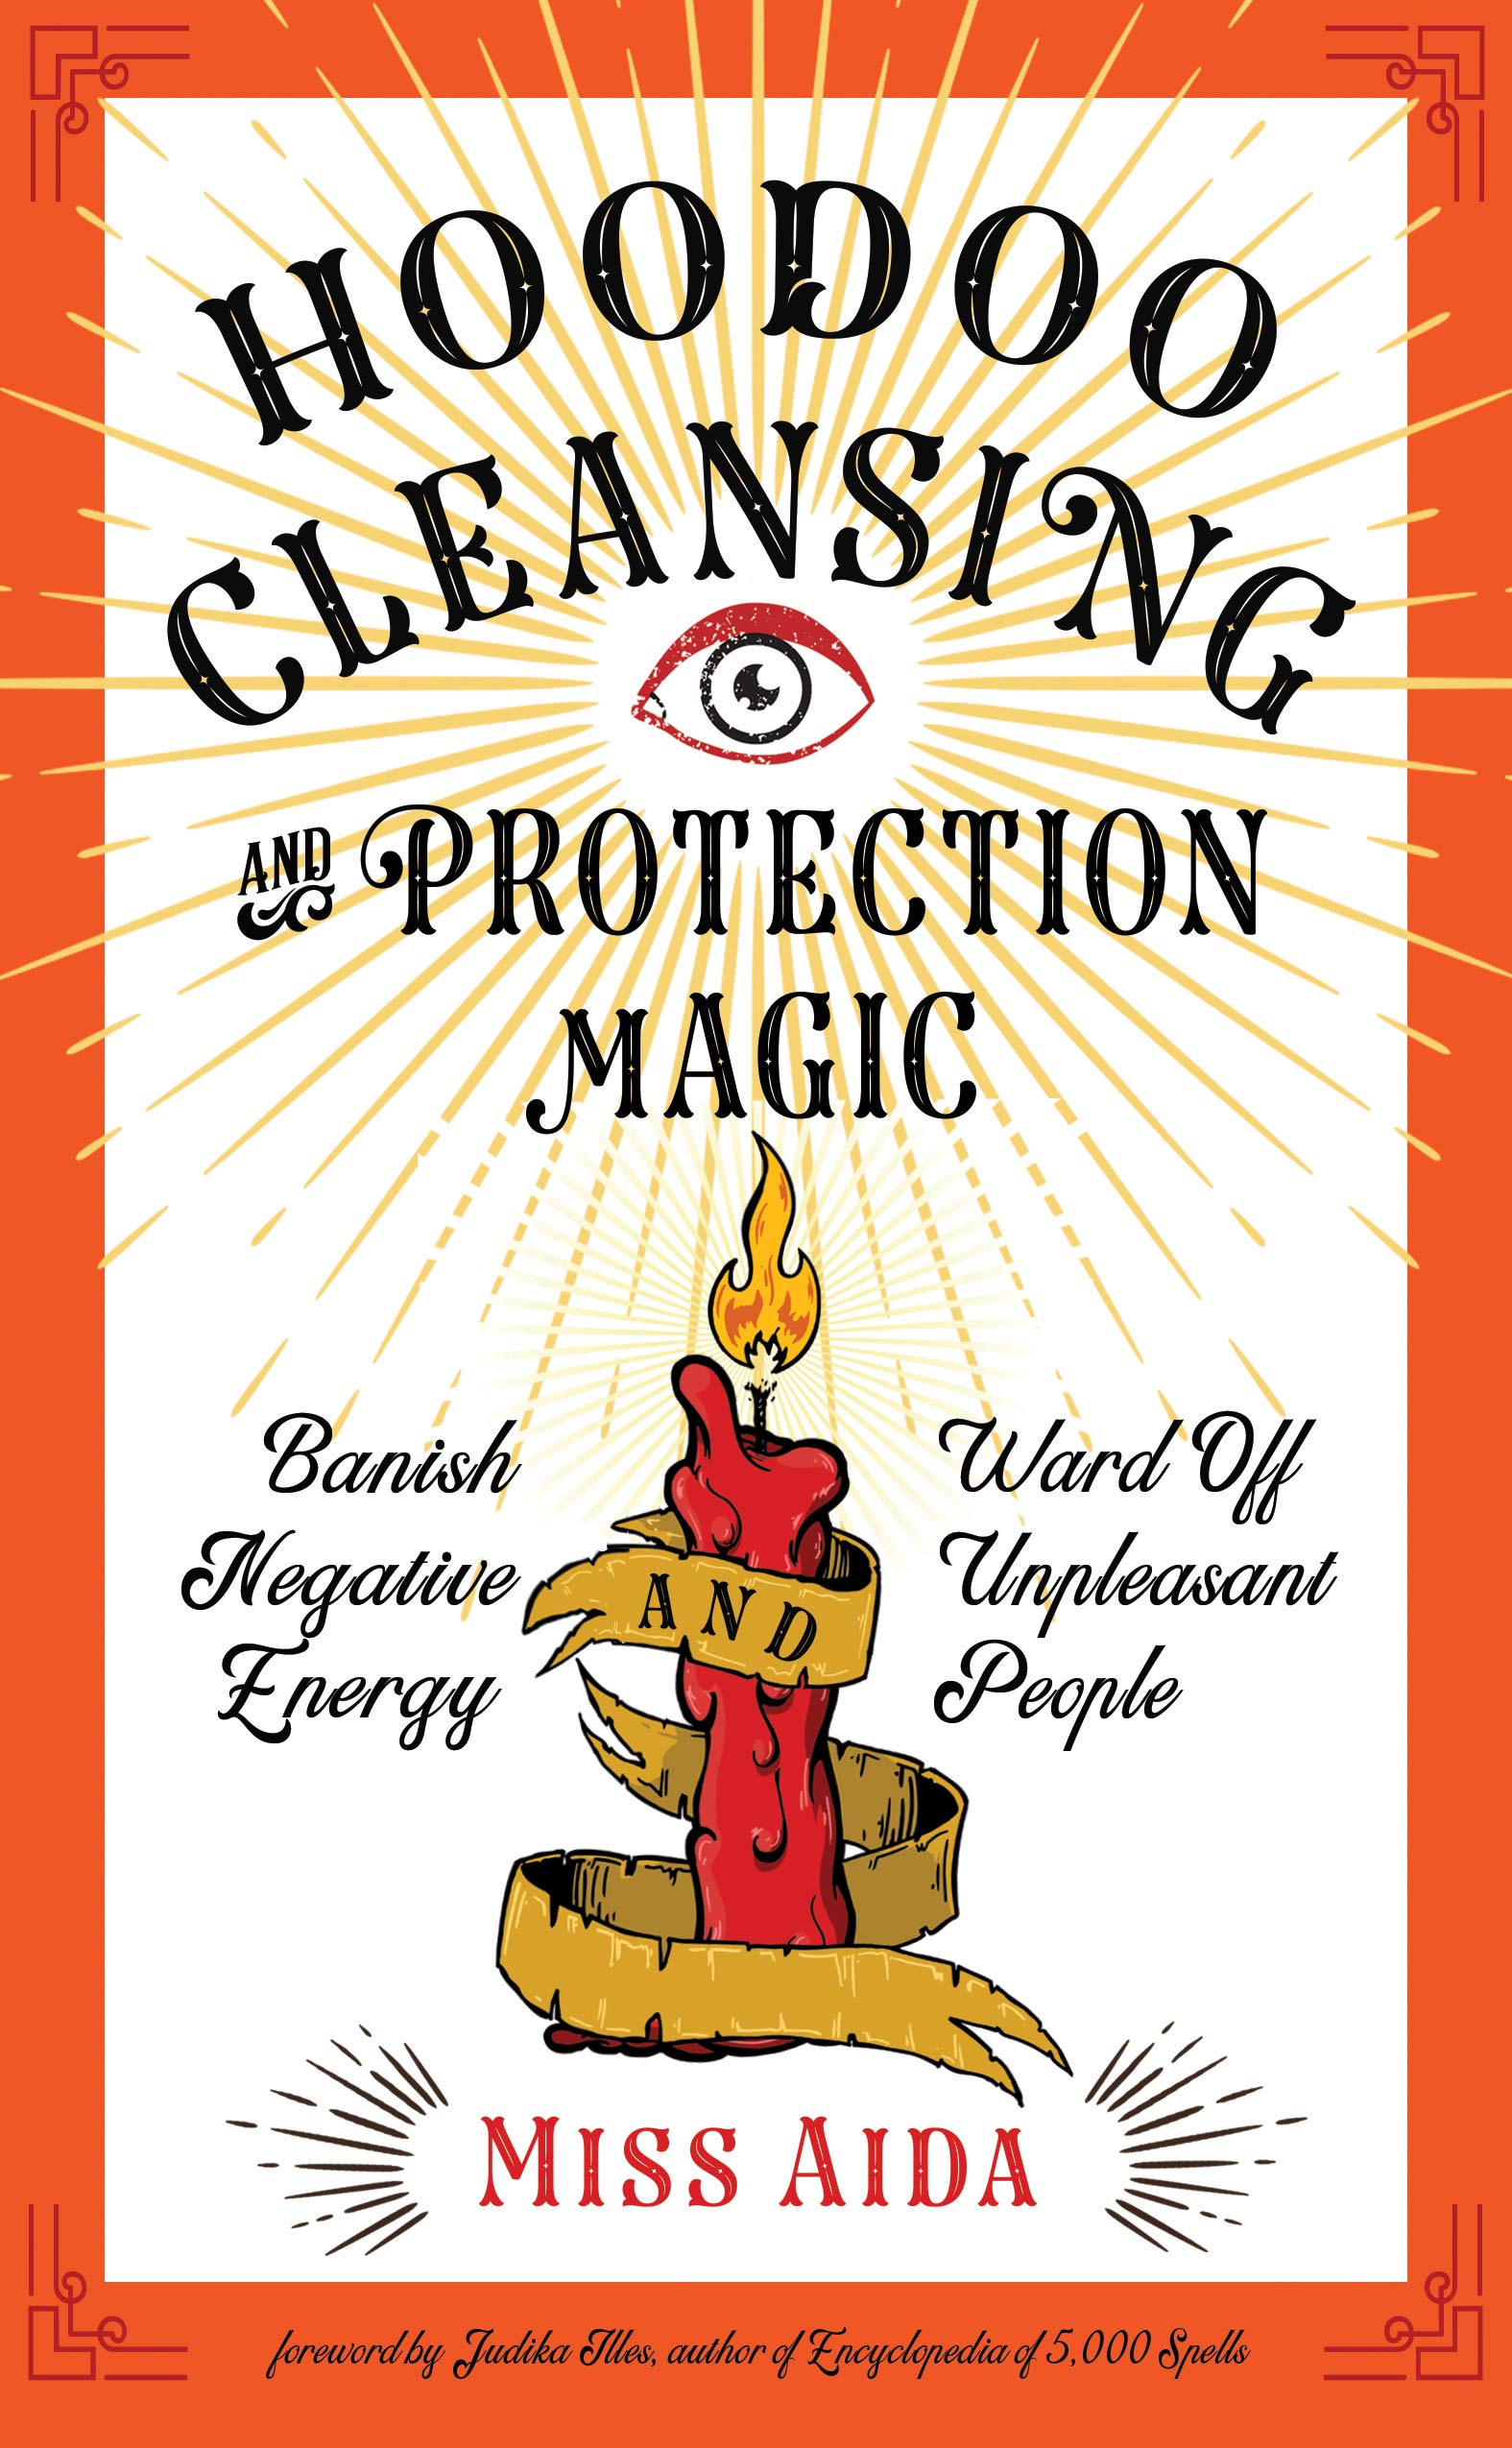 Hoodoo Cleansing and Protection Magic by Miss Aida